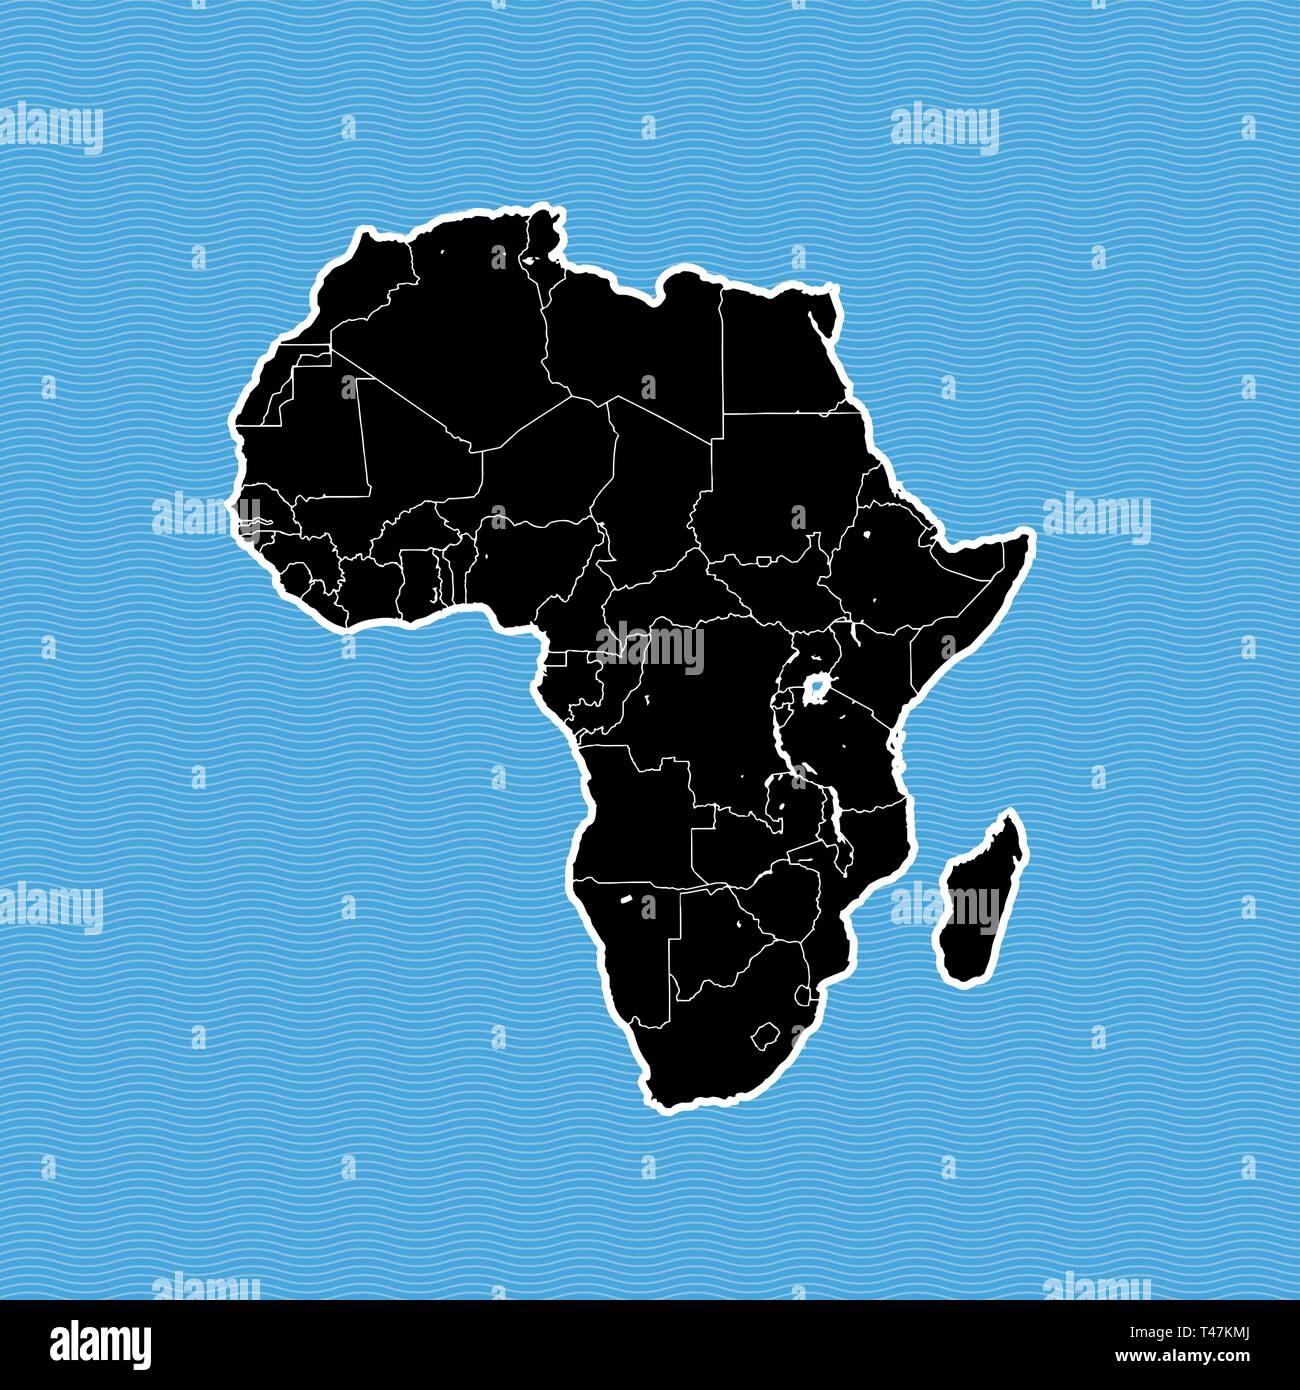 Africa map as island. Map separated on blue wave water background. Stock Vector